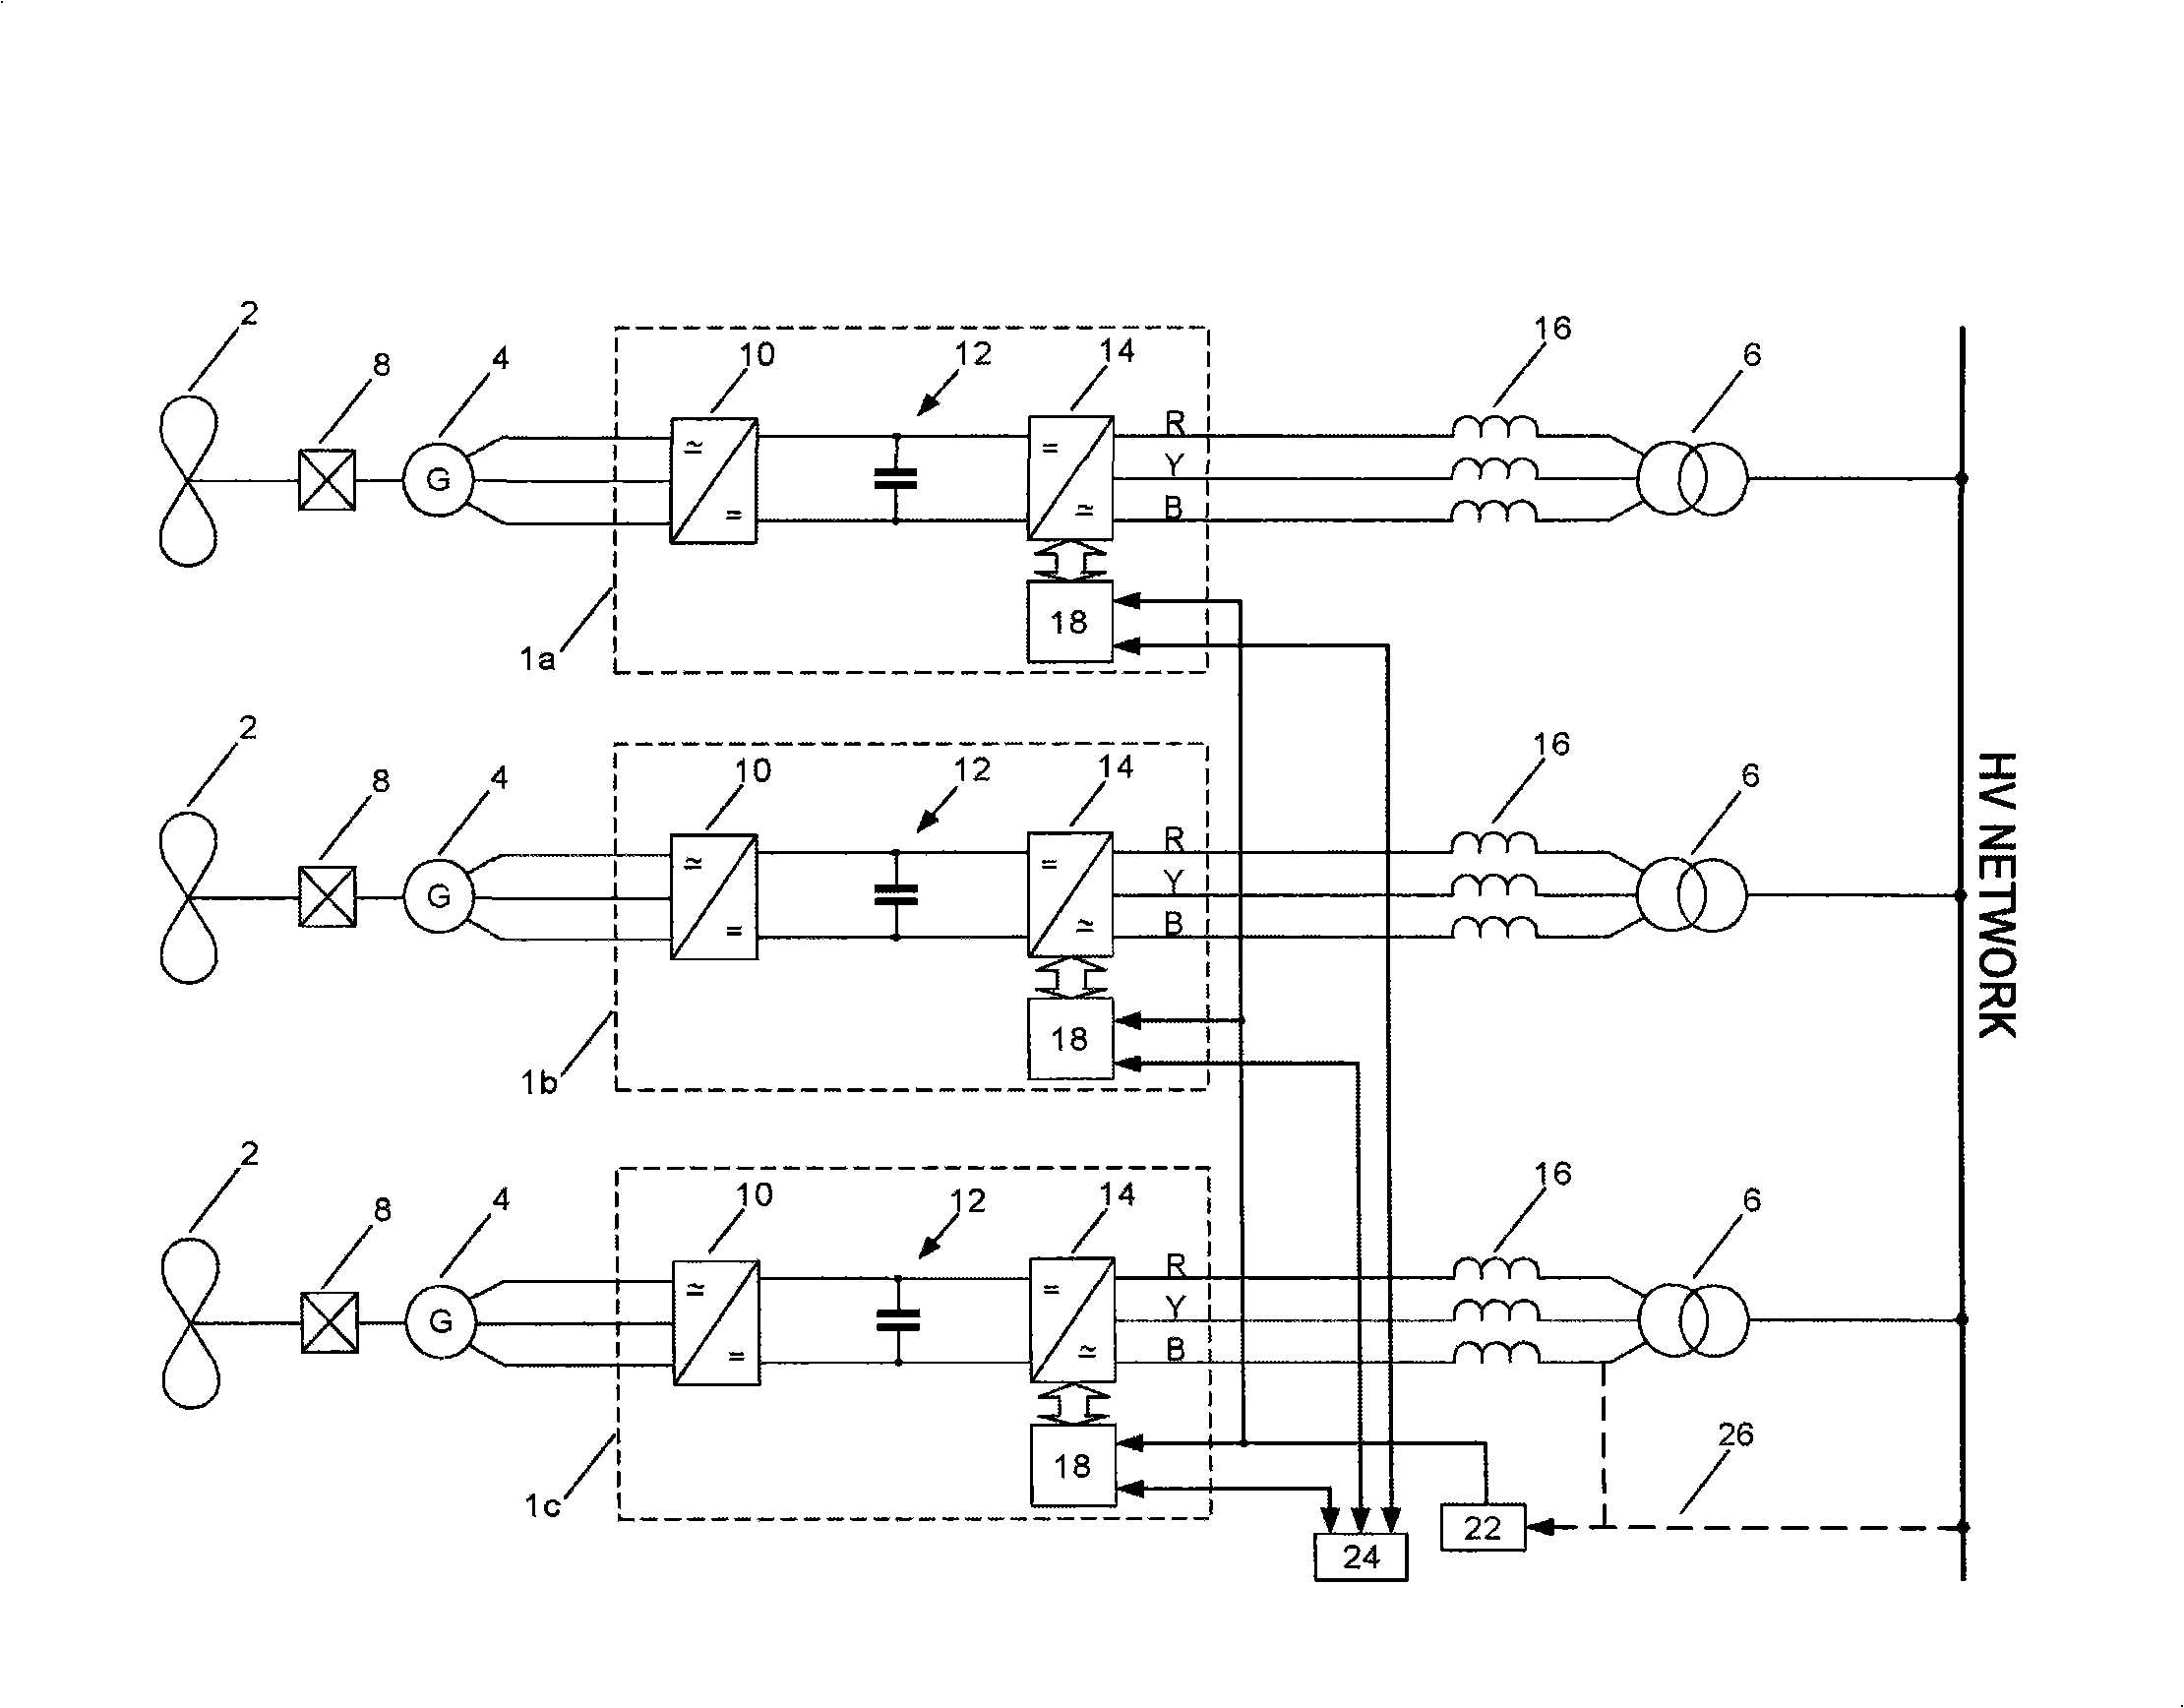 Control methods for the synchronization and phase shift of the pulse width modulation (PWM) strategy of power converters